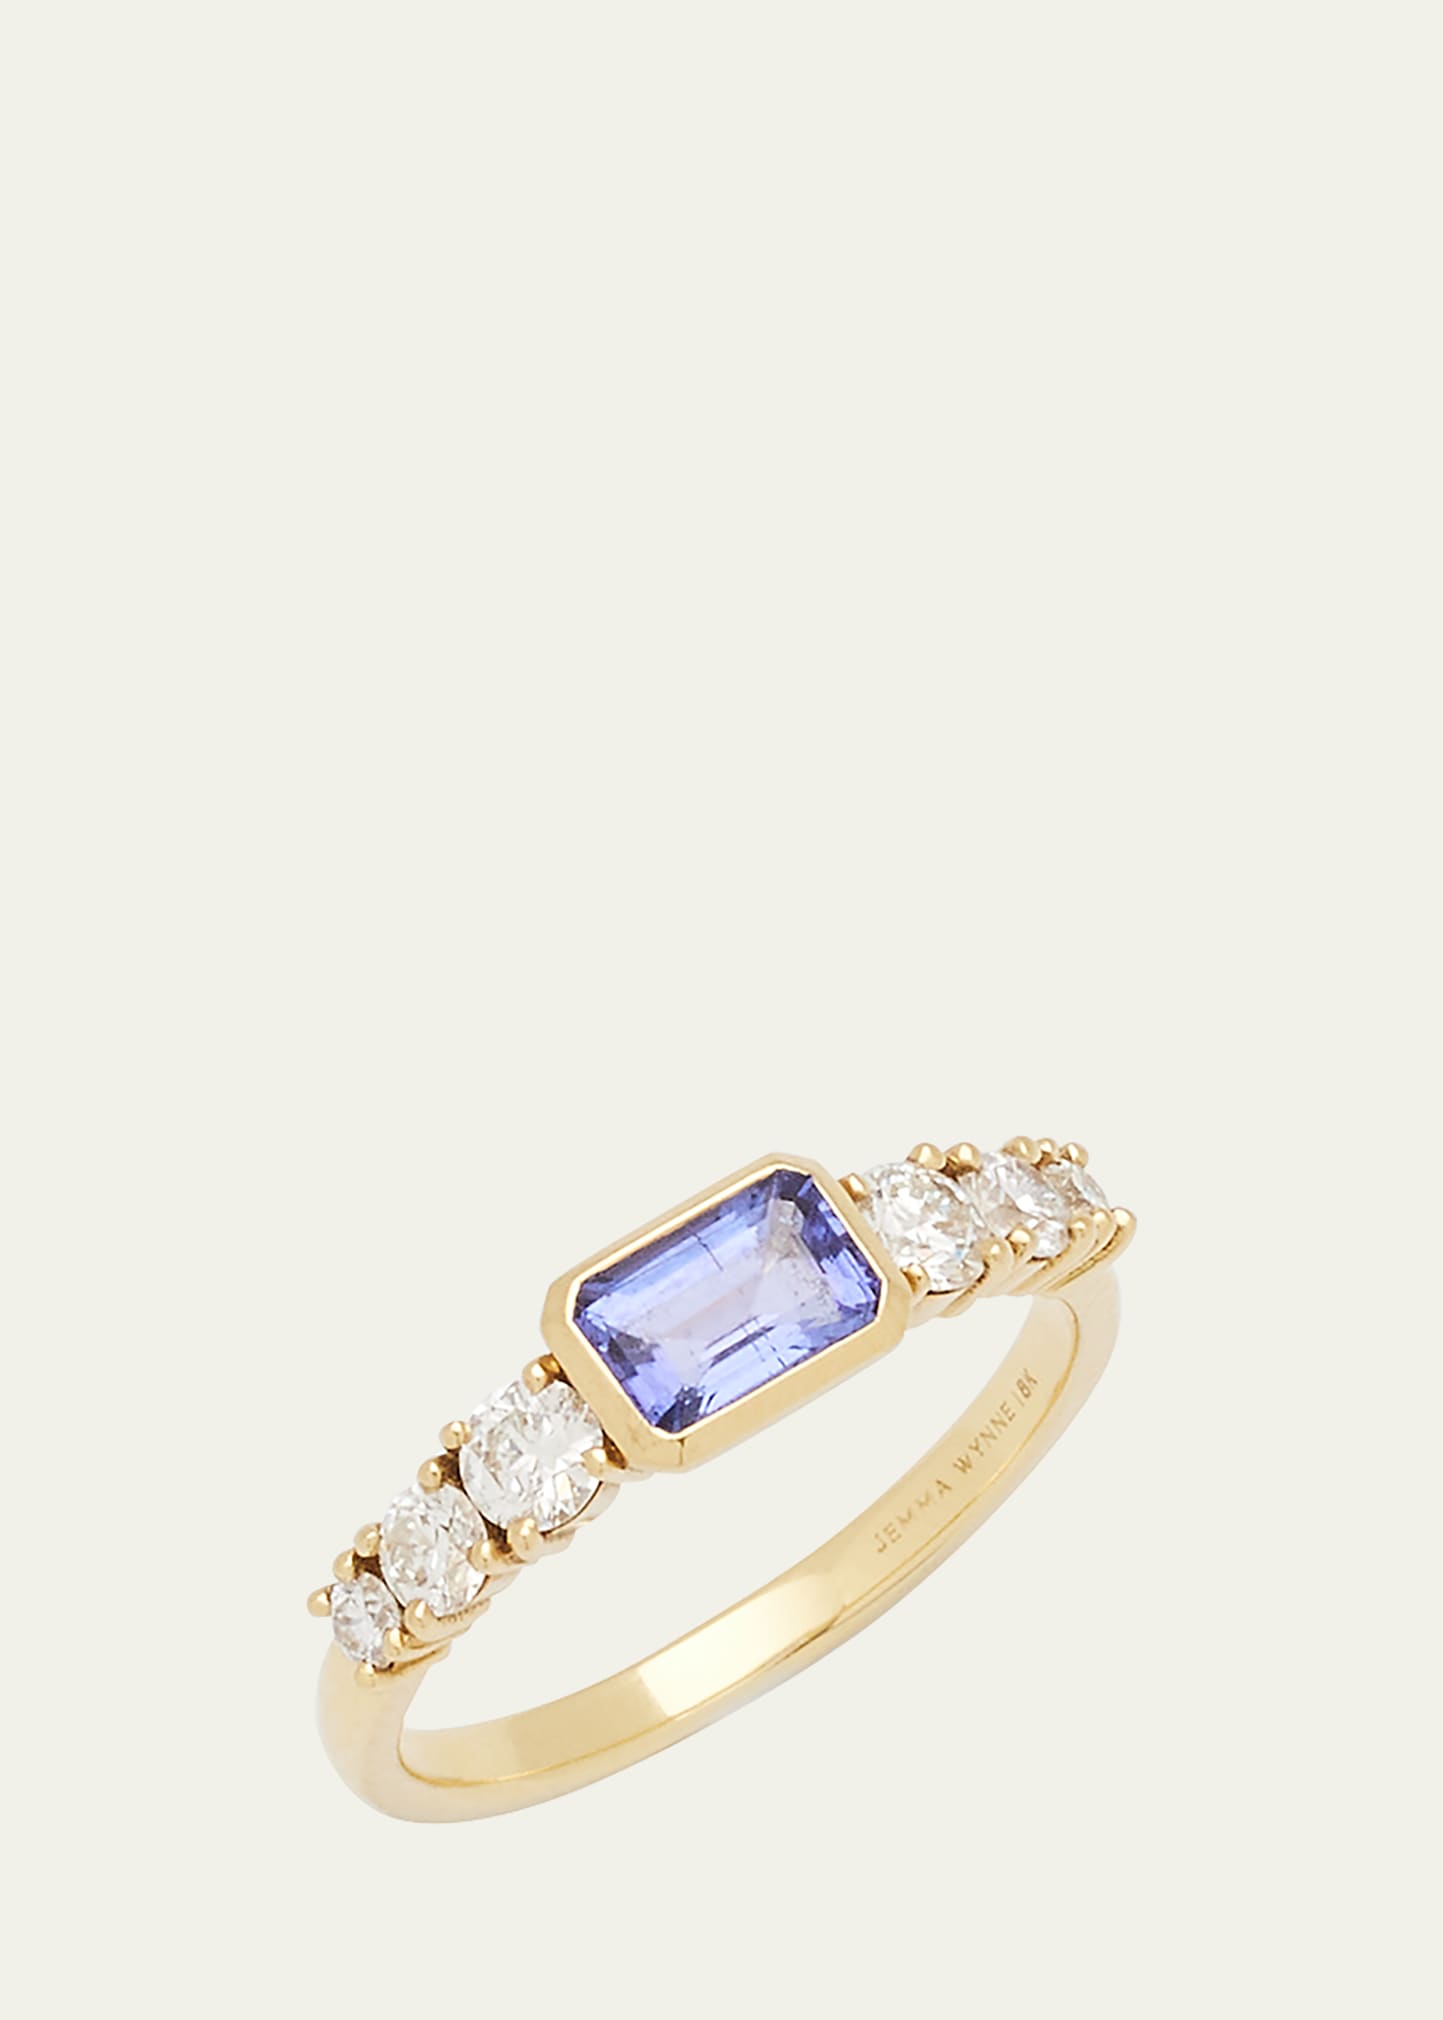 Jemma Wynne Limited Edition Toujours Tanzanite and Diamond Ring